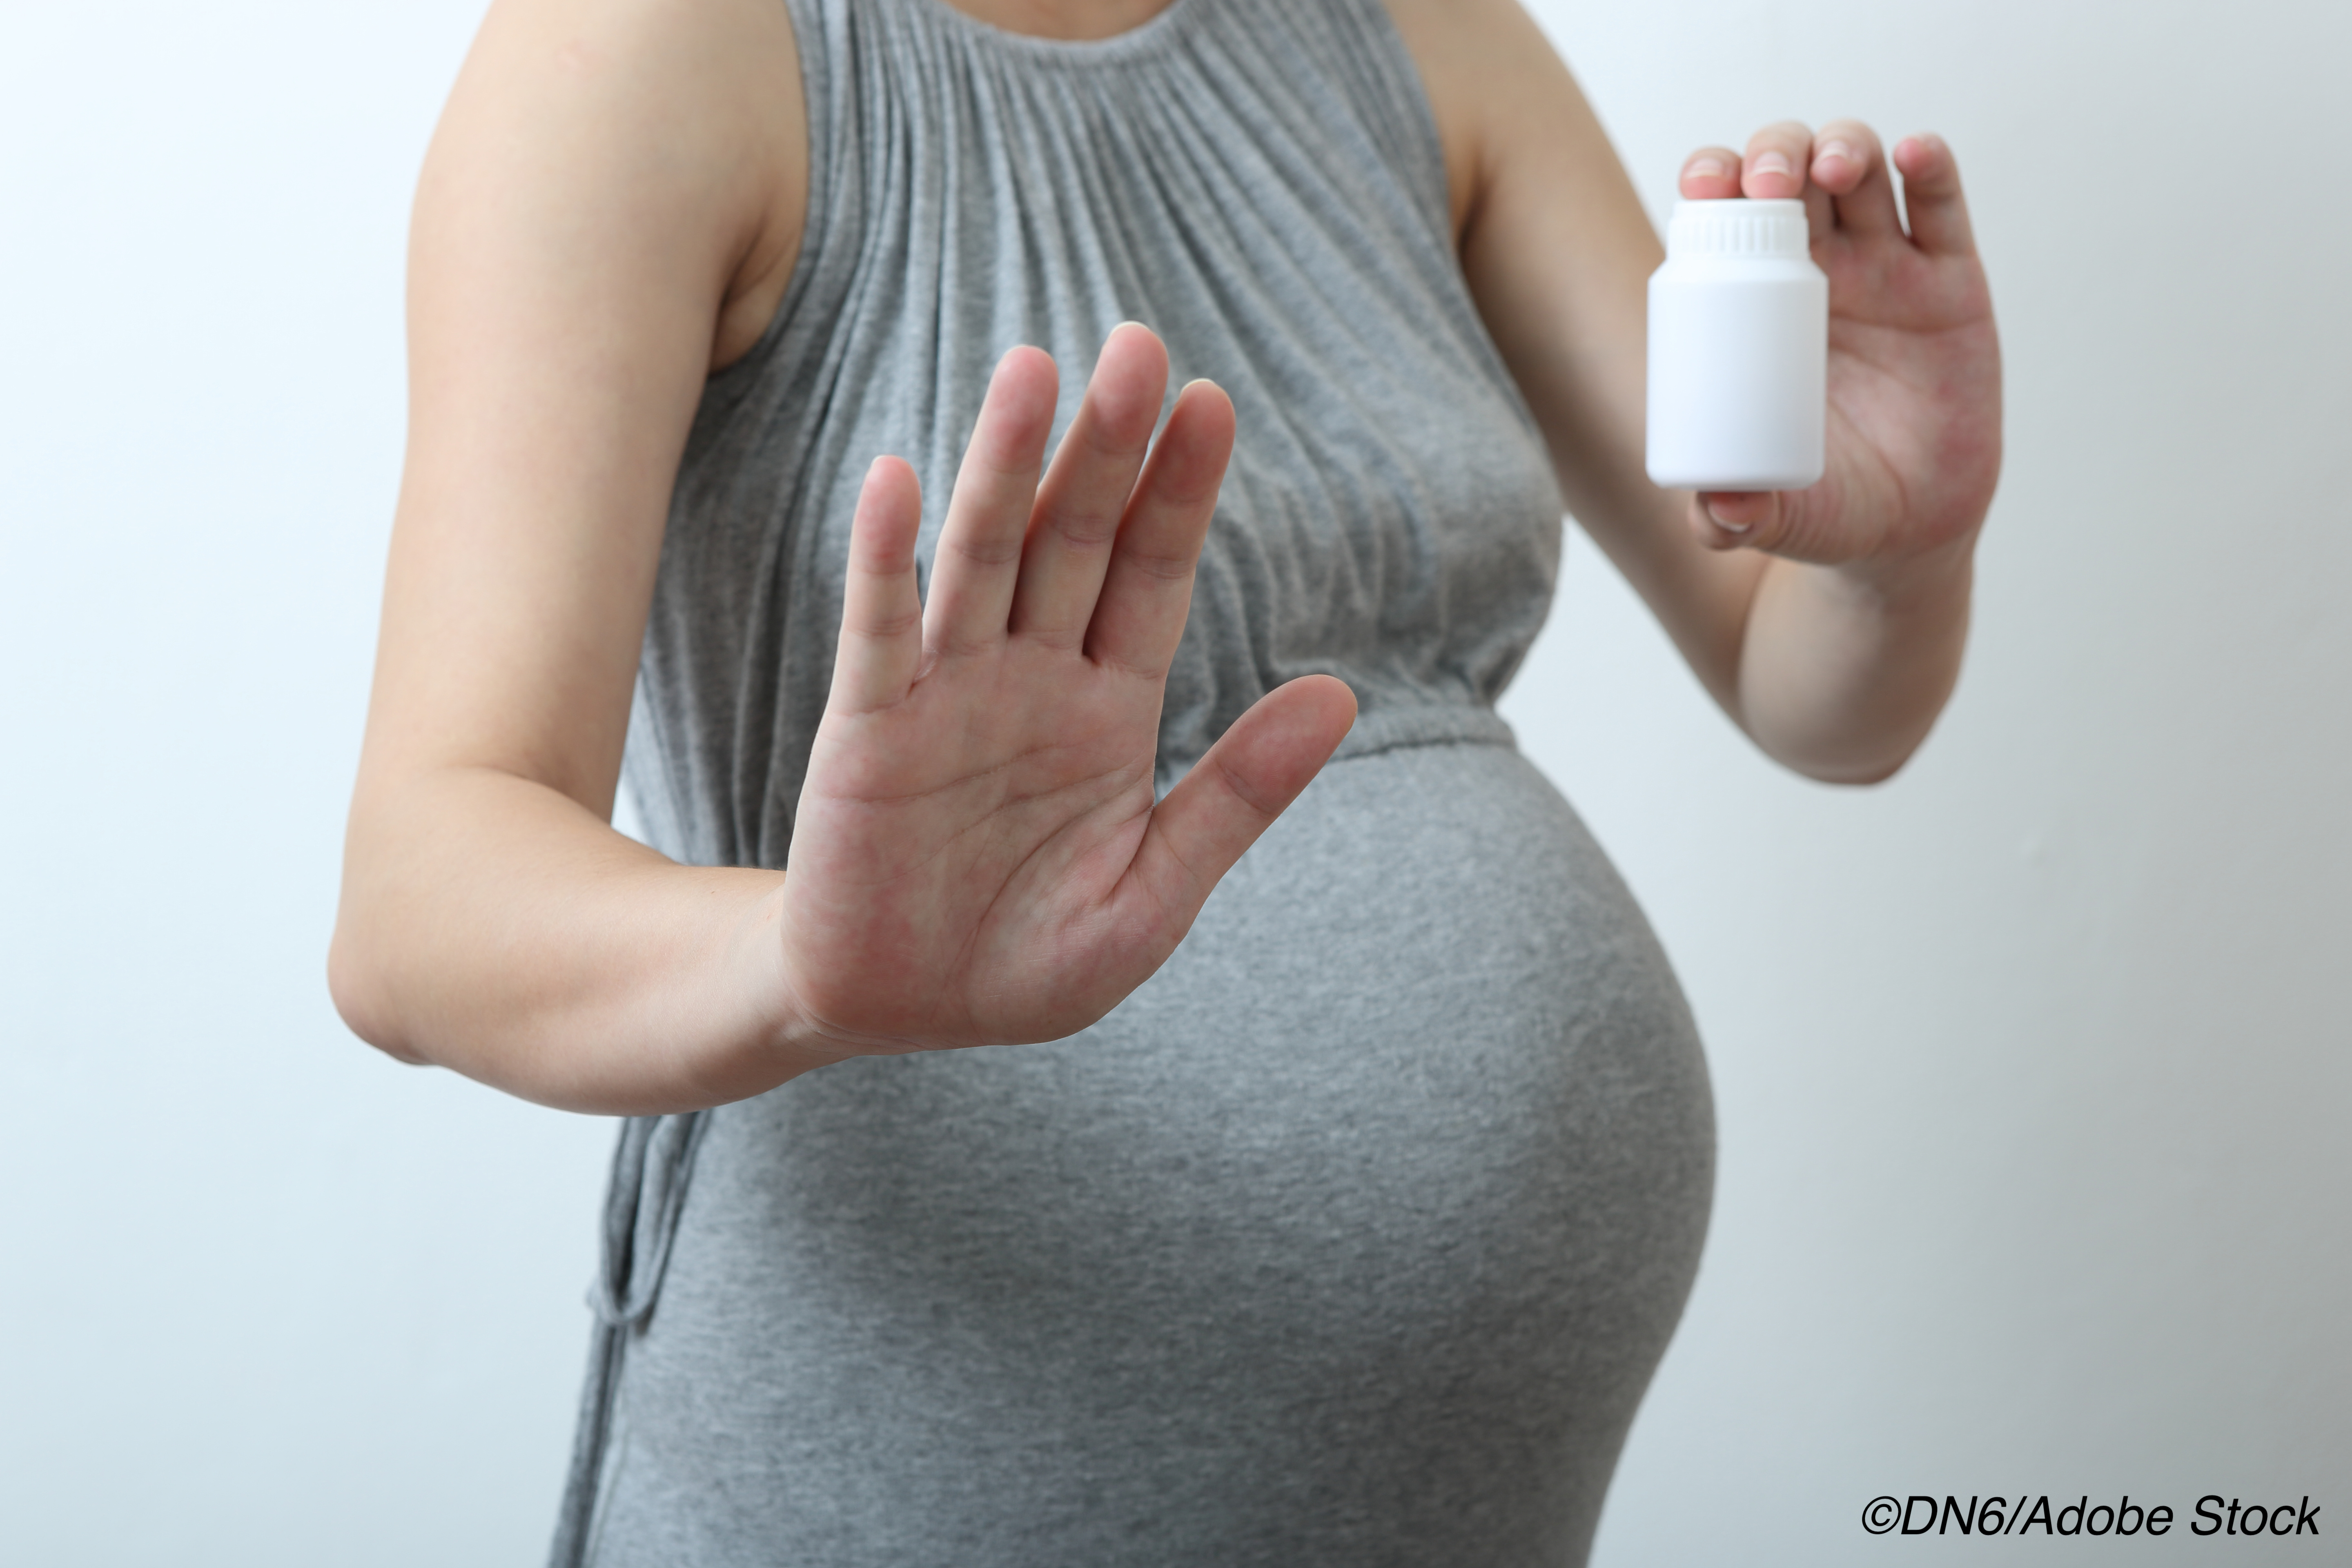 Pregnancy: FDA Warns of NSAID Risk to Mom and/or Fetus